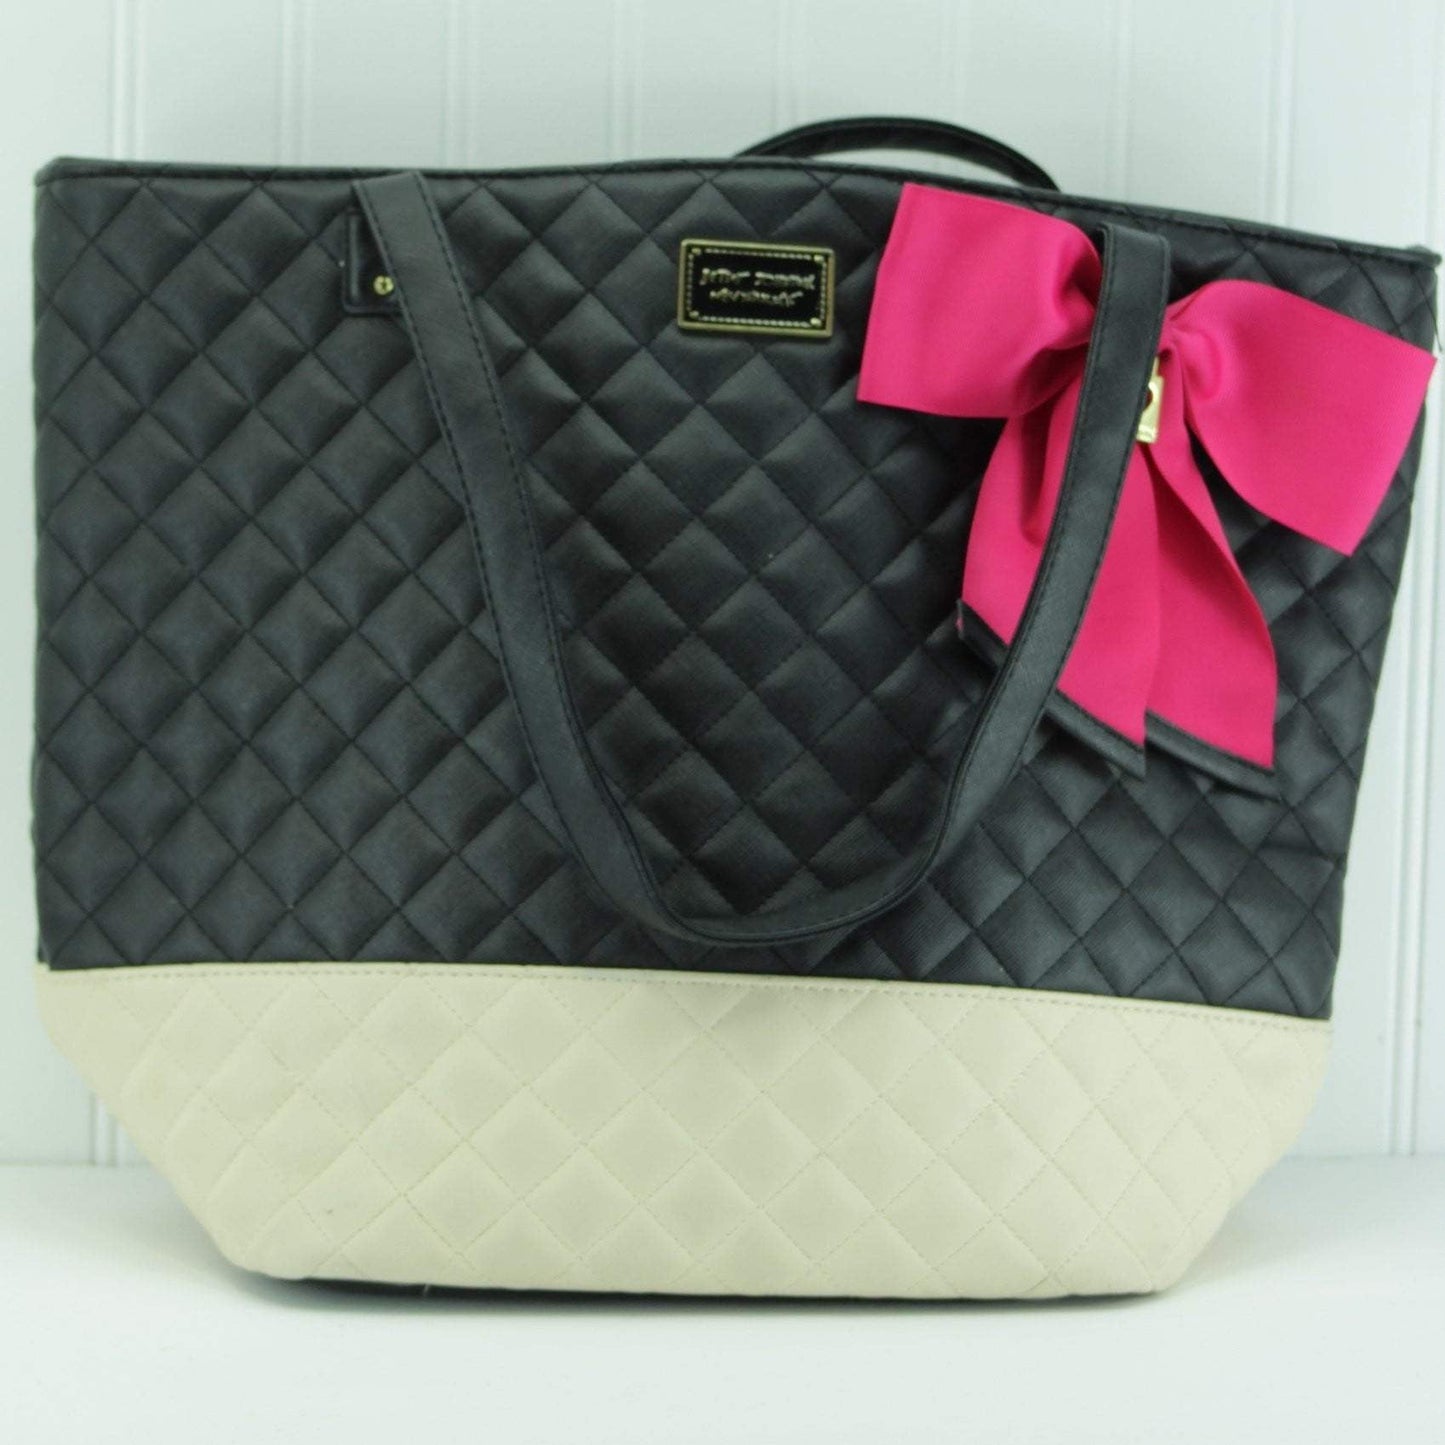 Betsey Johnson Quilted Satchel Bag - Black White Bow Heart